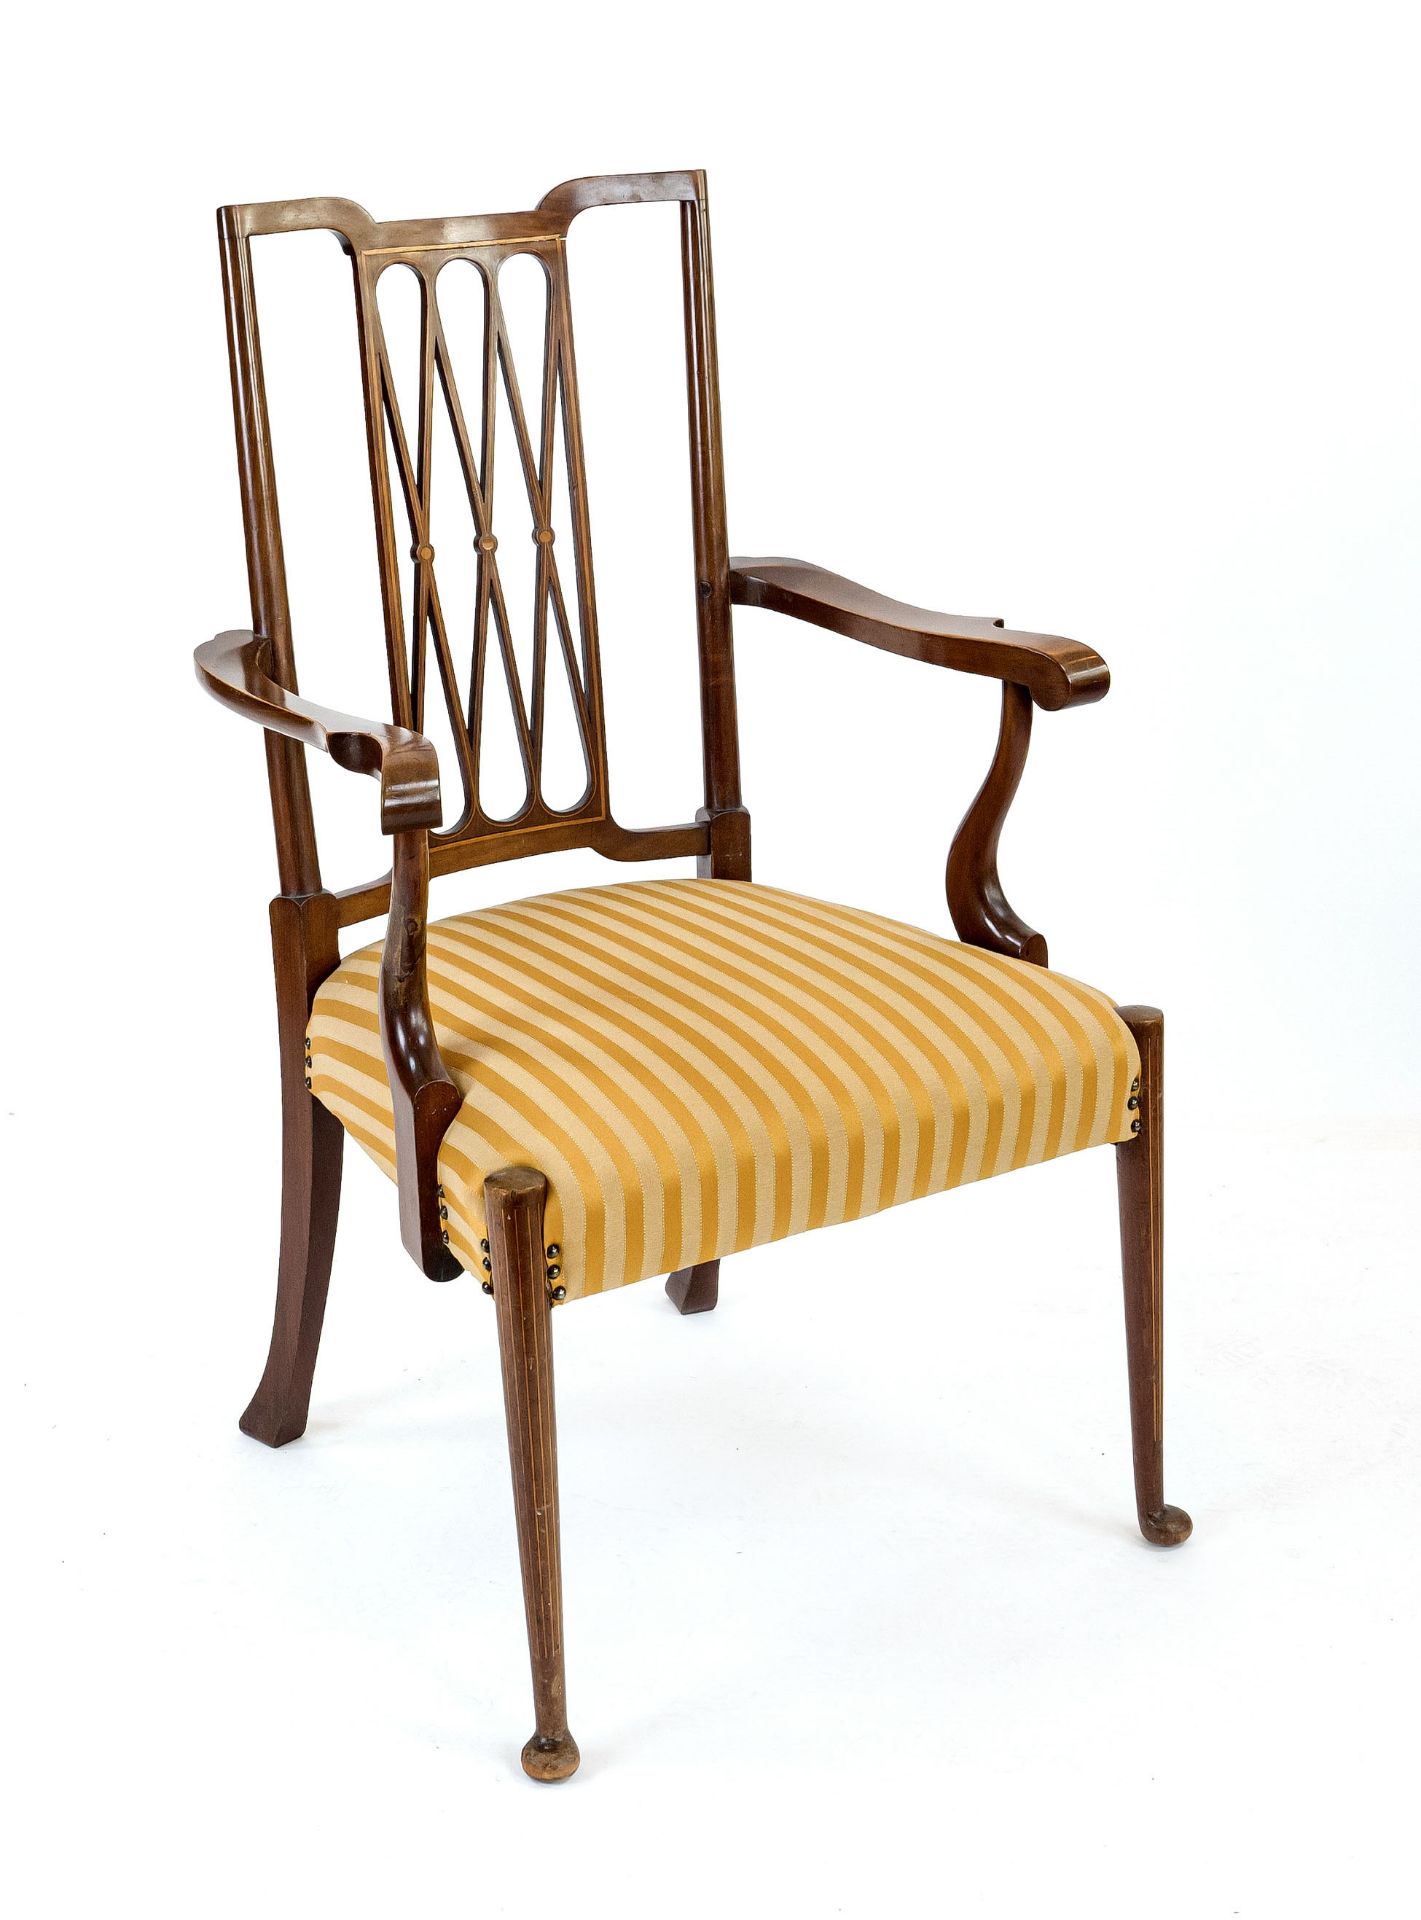 Armchair, England 19th century, mahogany with thread inlays, 102 x 57 x 50 cm - The furniture can